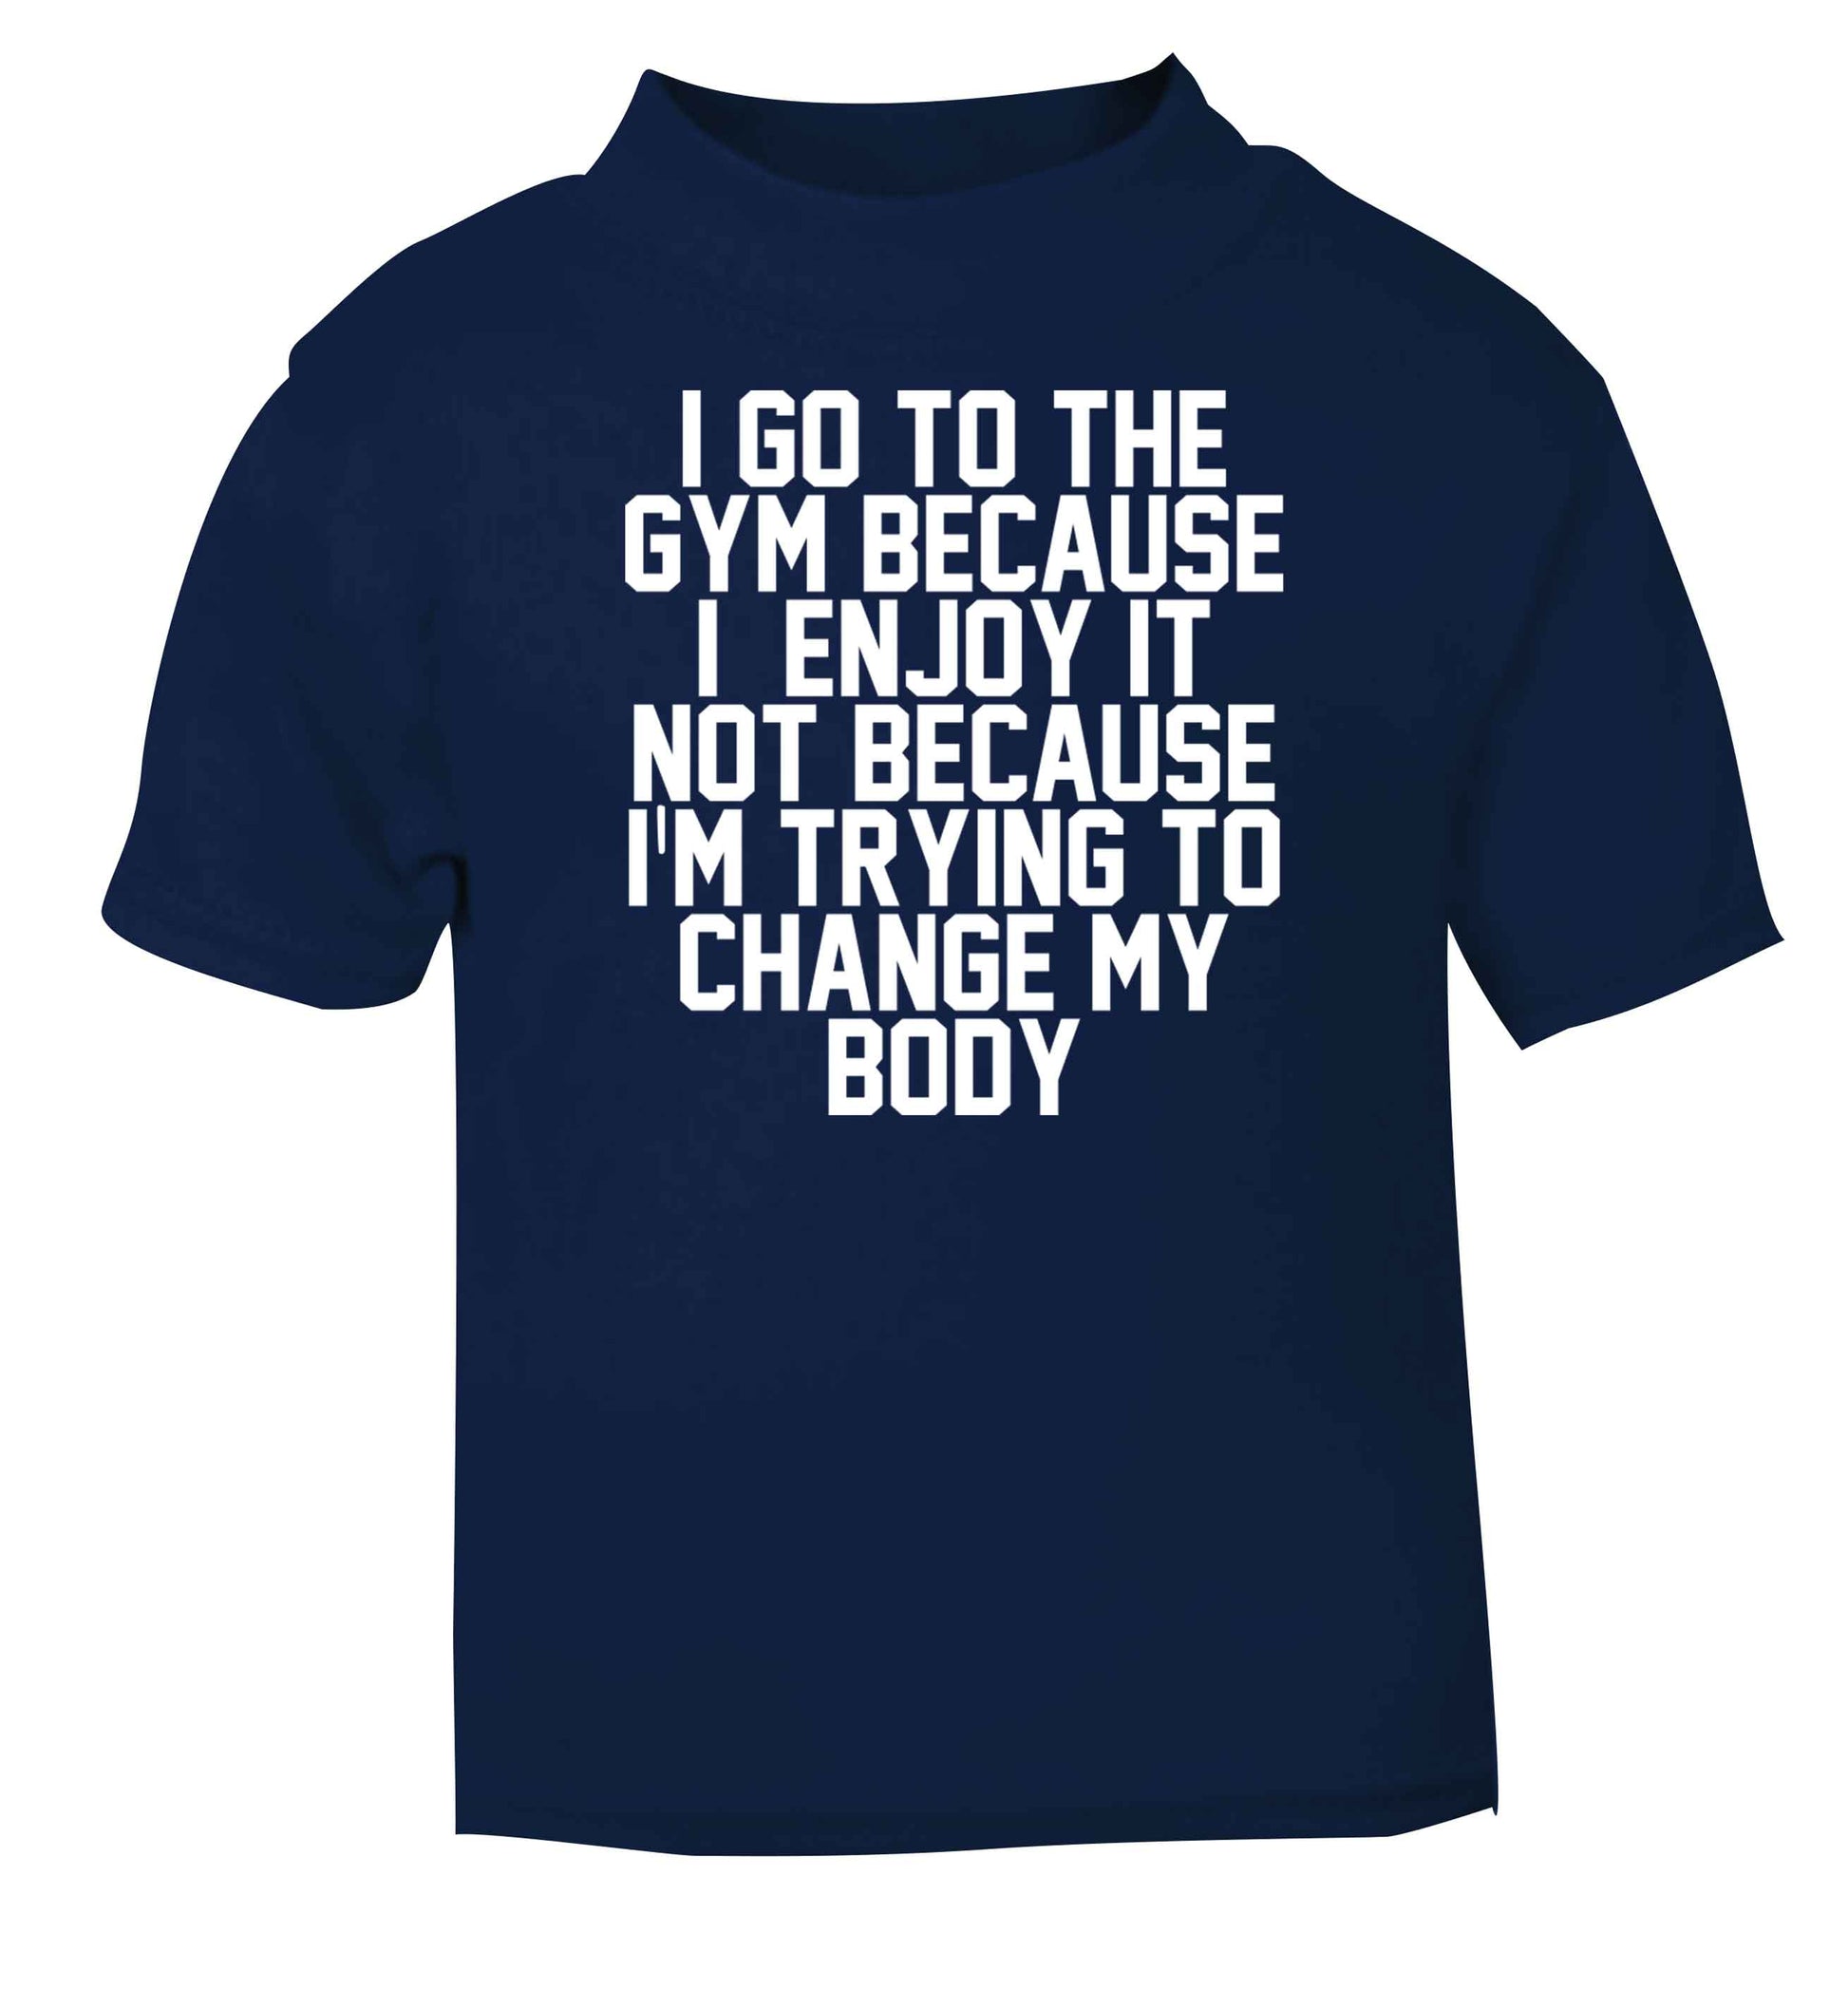 I go to the gym because I enjoy it not because I'm trying to change my body navy baby toddler Tshirt 2 Years